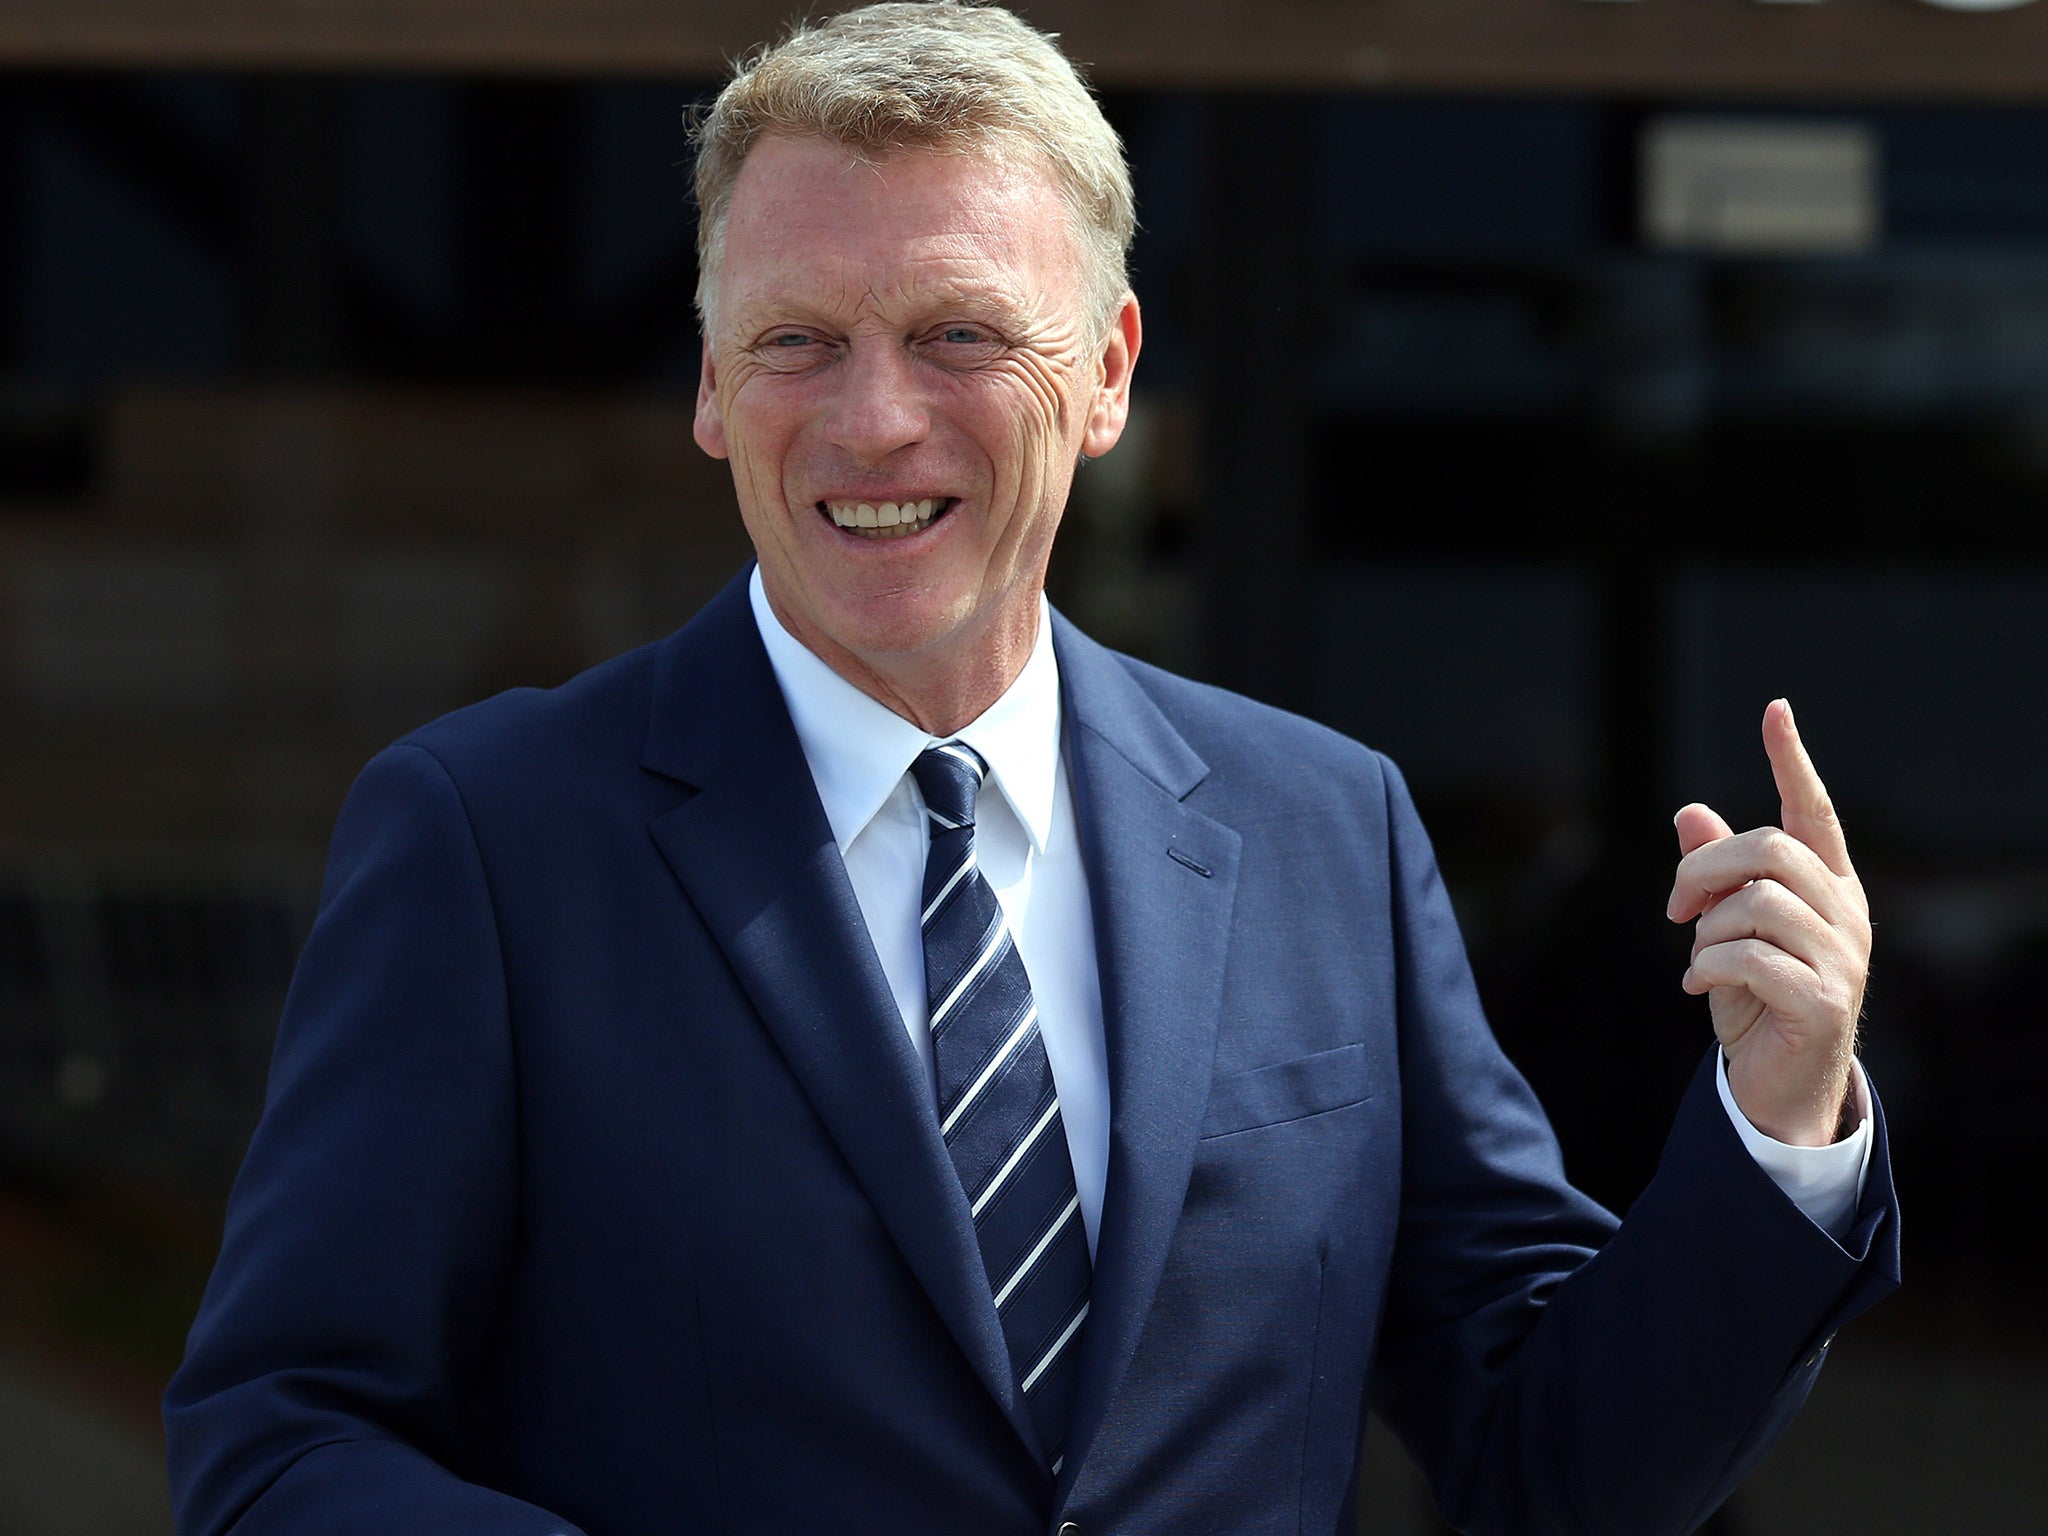 Sunderland will be good for Moyes, and likewise the club will benefit from his experience